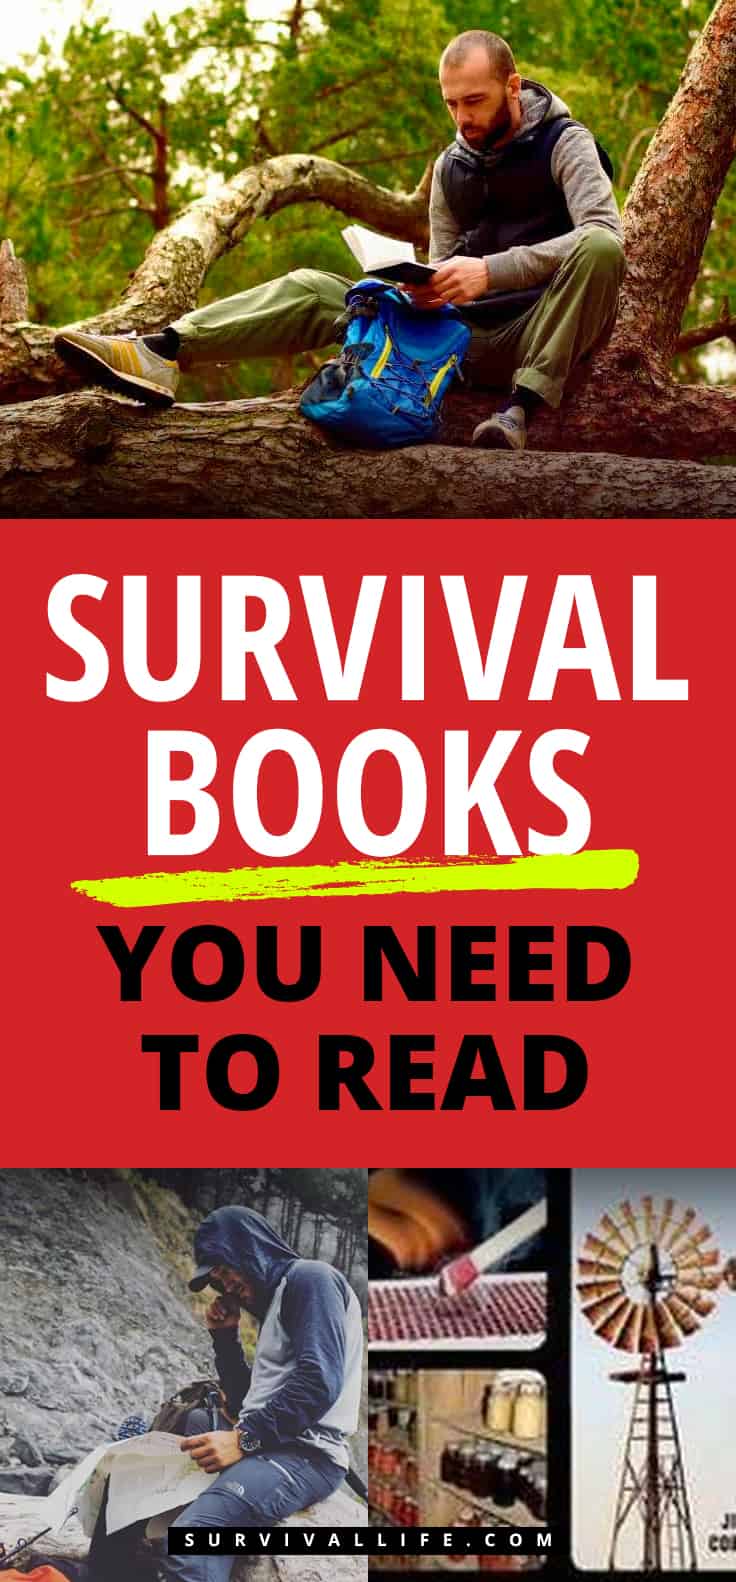 Survival Books | Survival Books You Need To Read | Survival Books You Need To Read | outdoor survival books